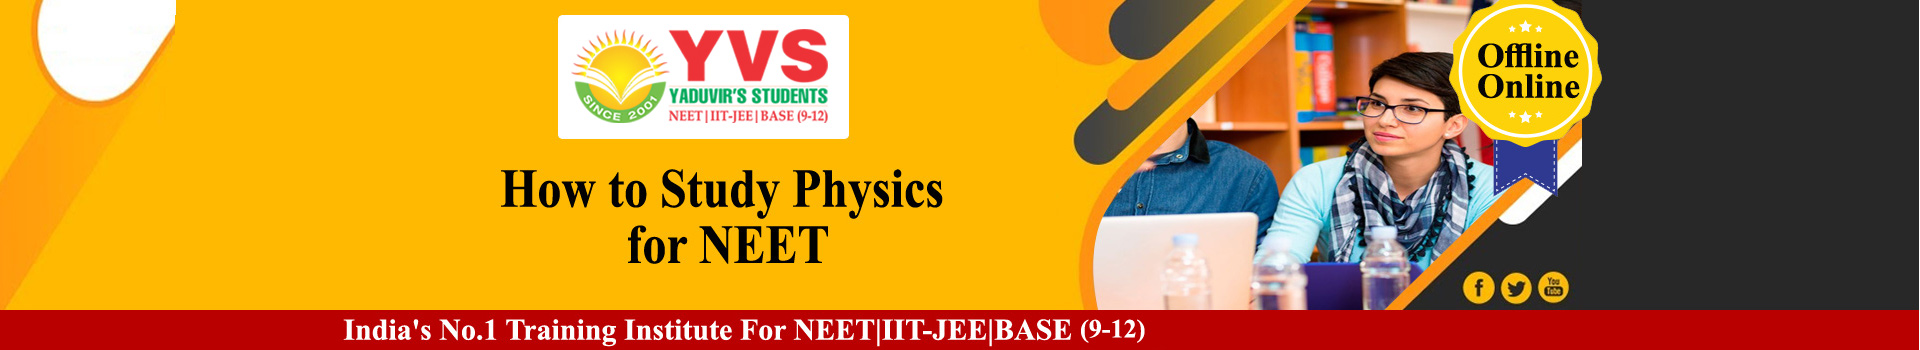 How to Study Physics for NEET